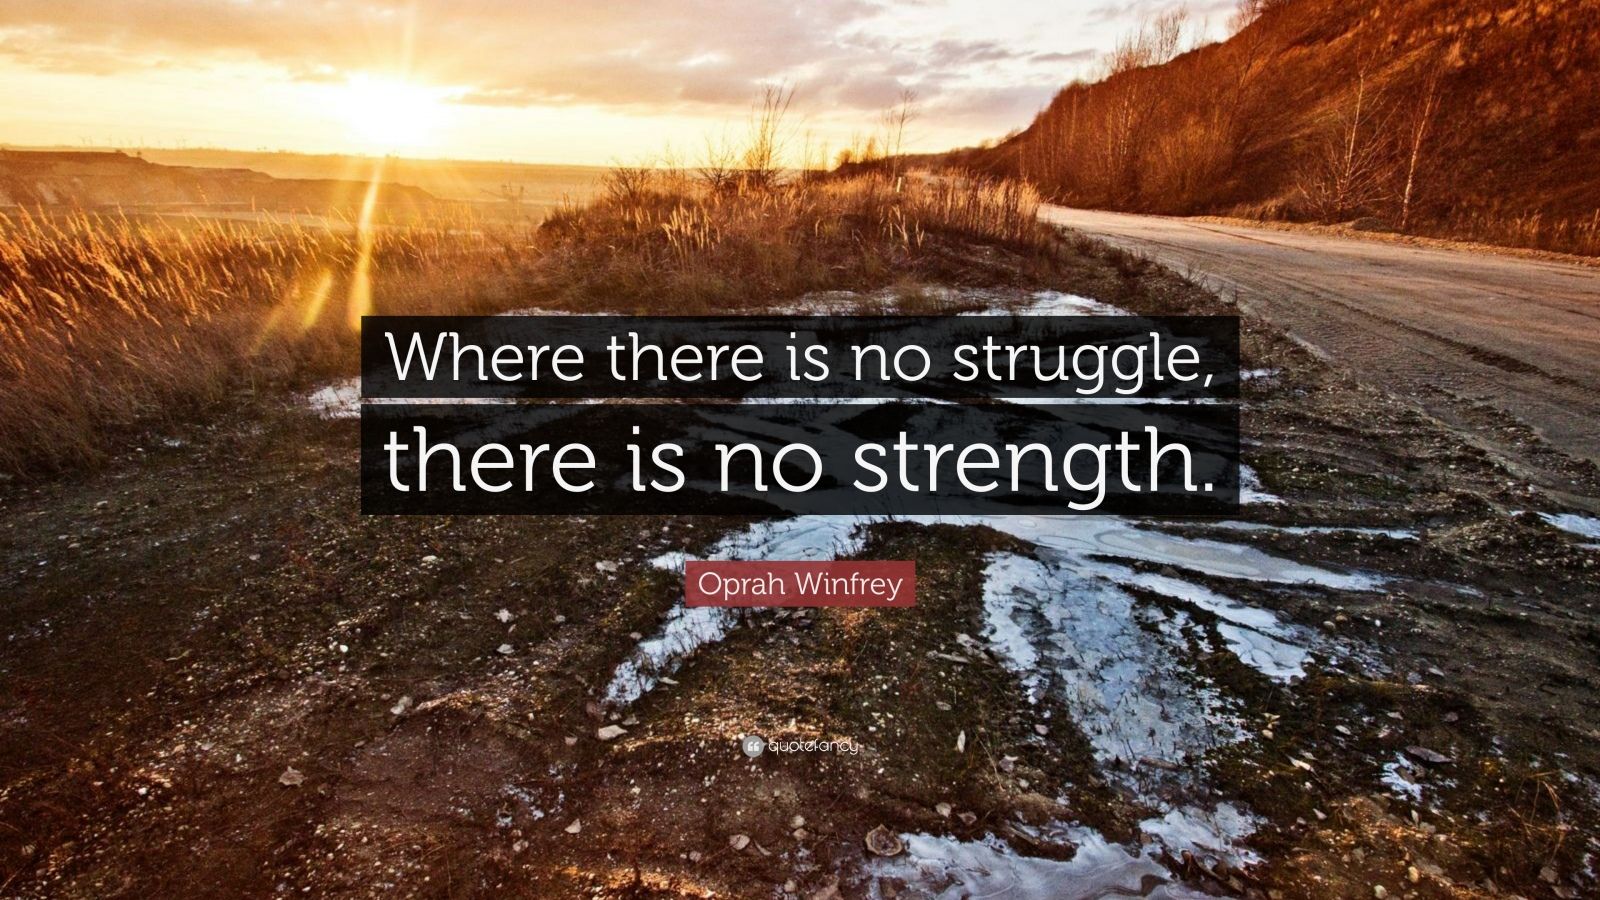 Oprah Winfrey Quote: “Where there is no struggle, there is no strength ...